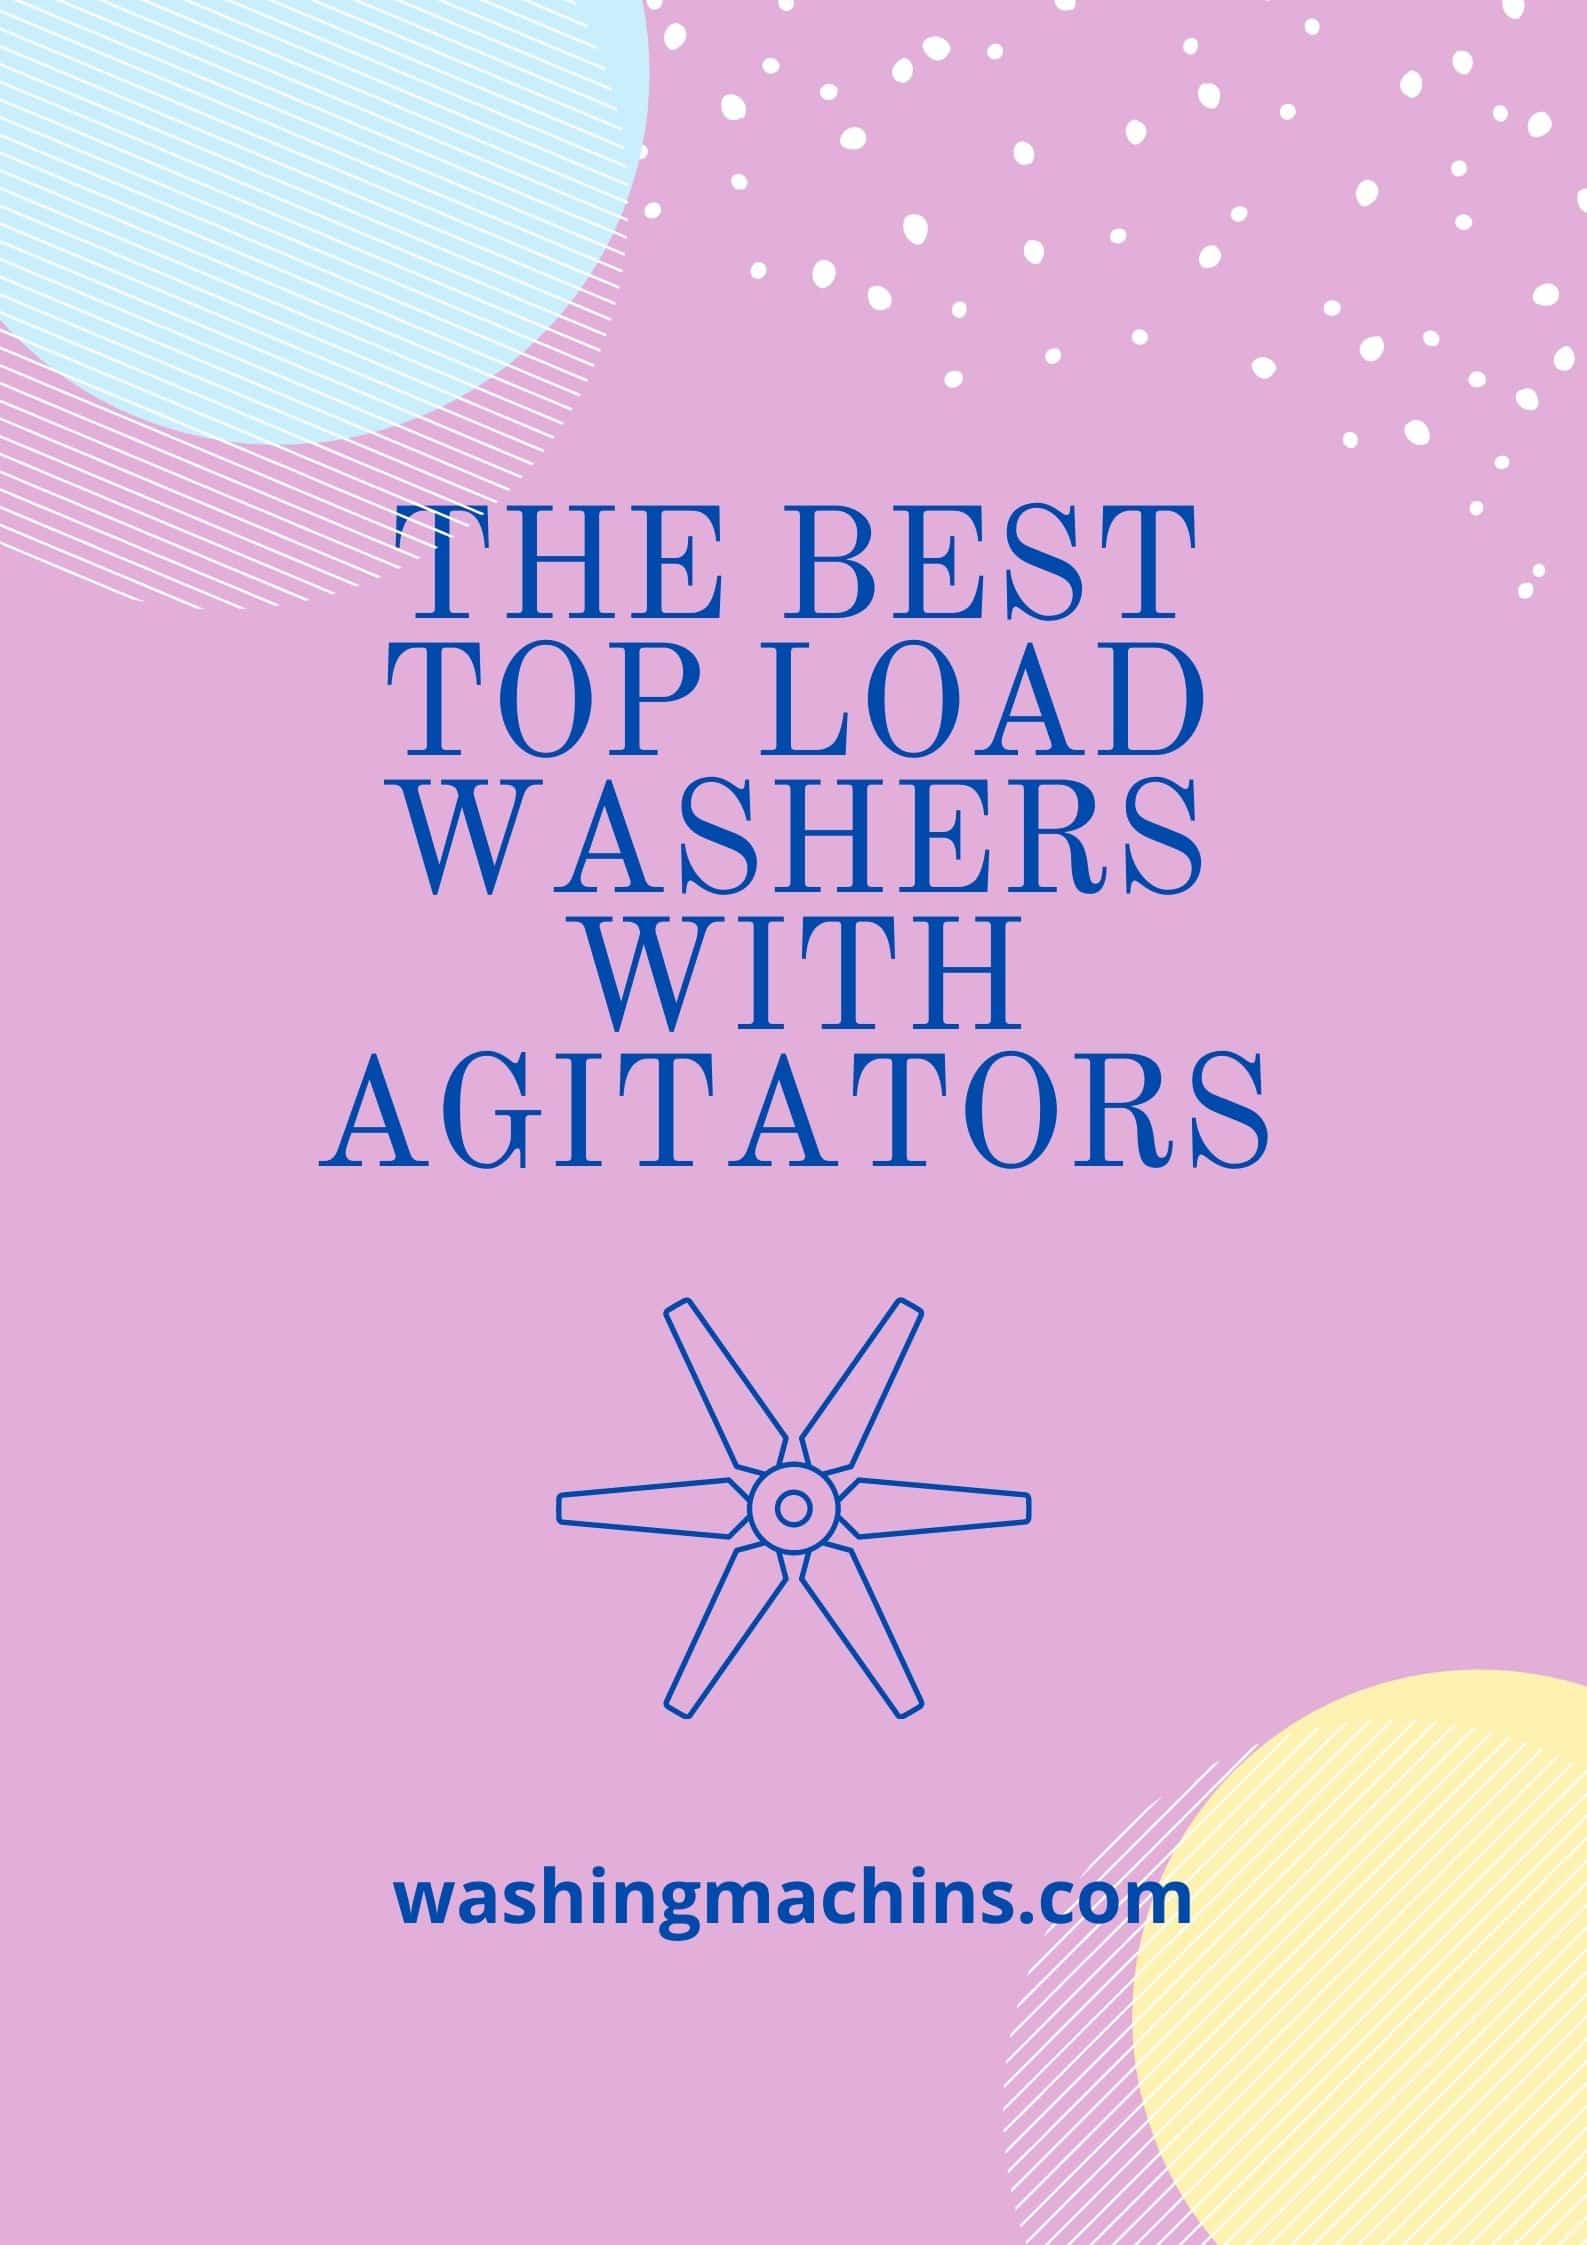 The 10 Best Top Load Washers With Agitators of 2022